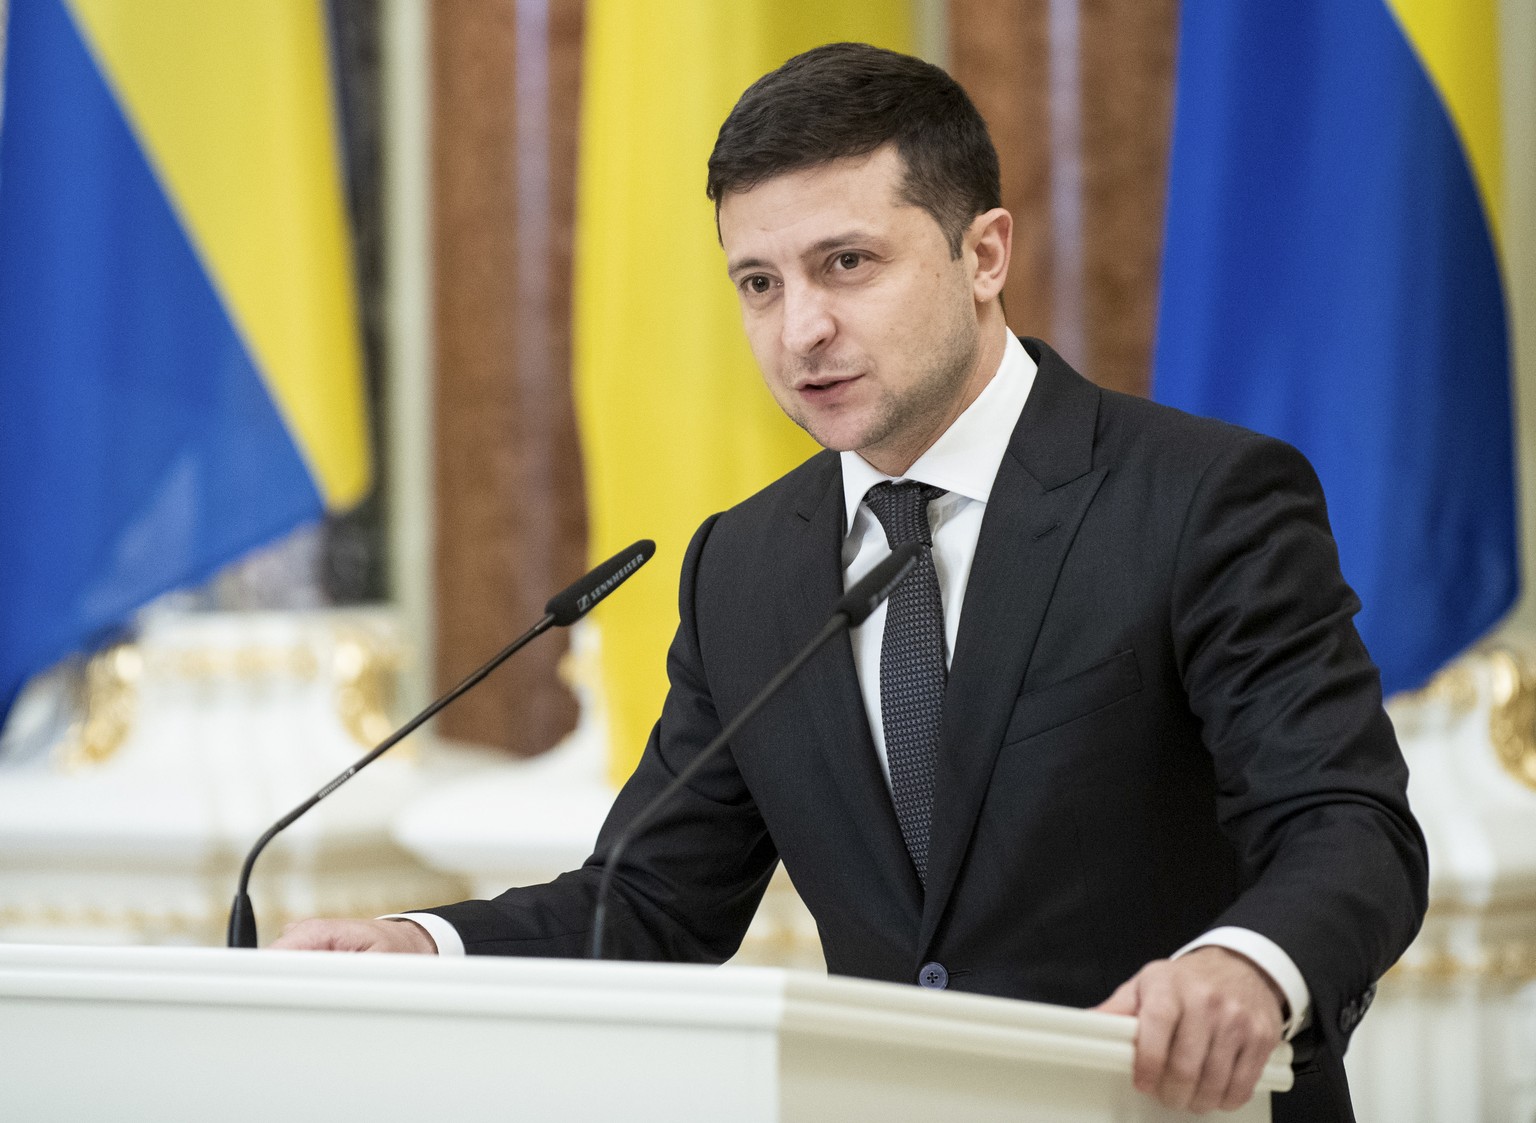 Ukrainian President Volodymyr Zelenskiy speaks in Kyiv, Ukraine, Wednesday, Dec. 4, 2019. Zelenskiy says he hopes his planned talks with the leaders of Russia, France and Germany will settle the confl ...